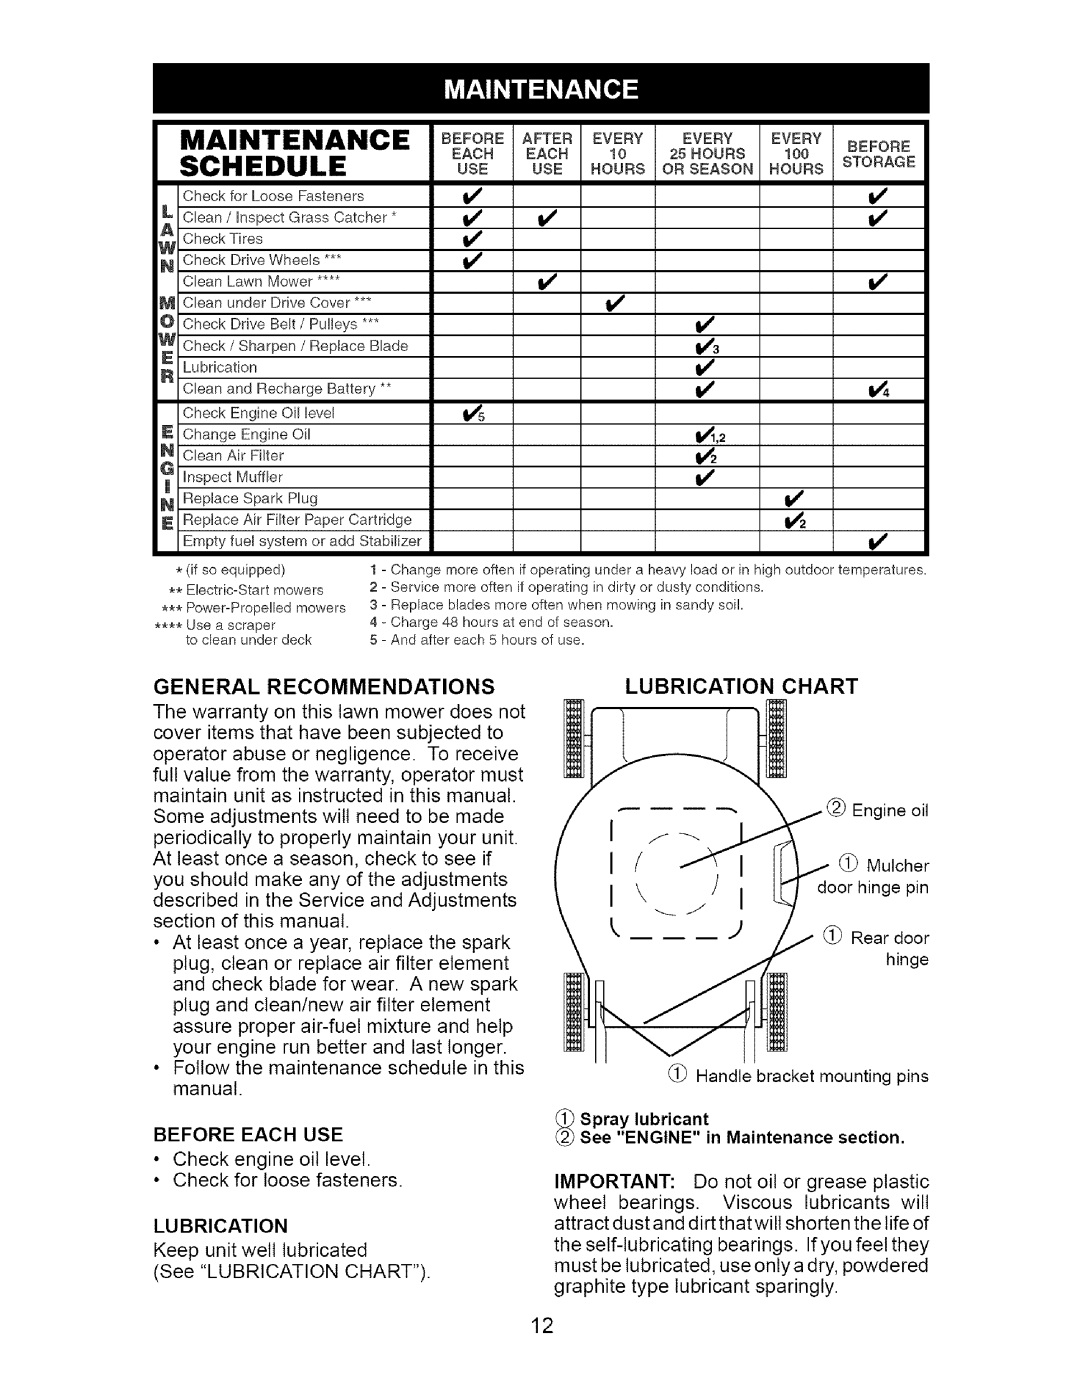 Craftsman 917.377011 owner manual Schedule, Lubrication Chart, General Recommendations, Spray lubricant 